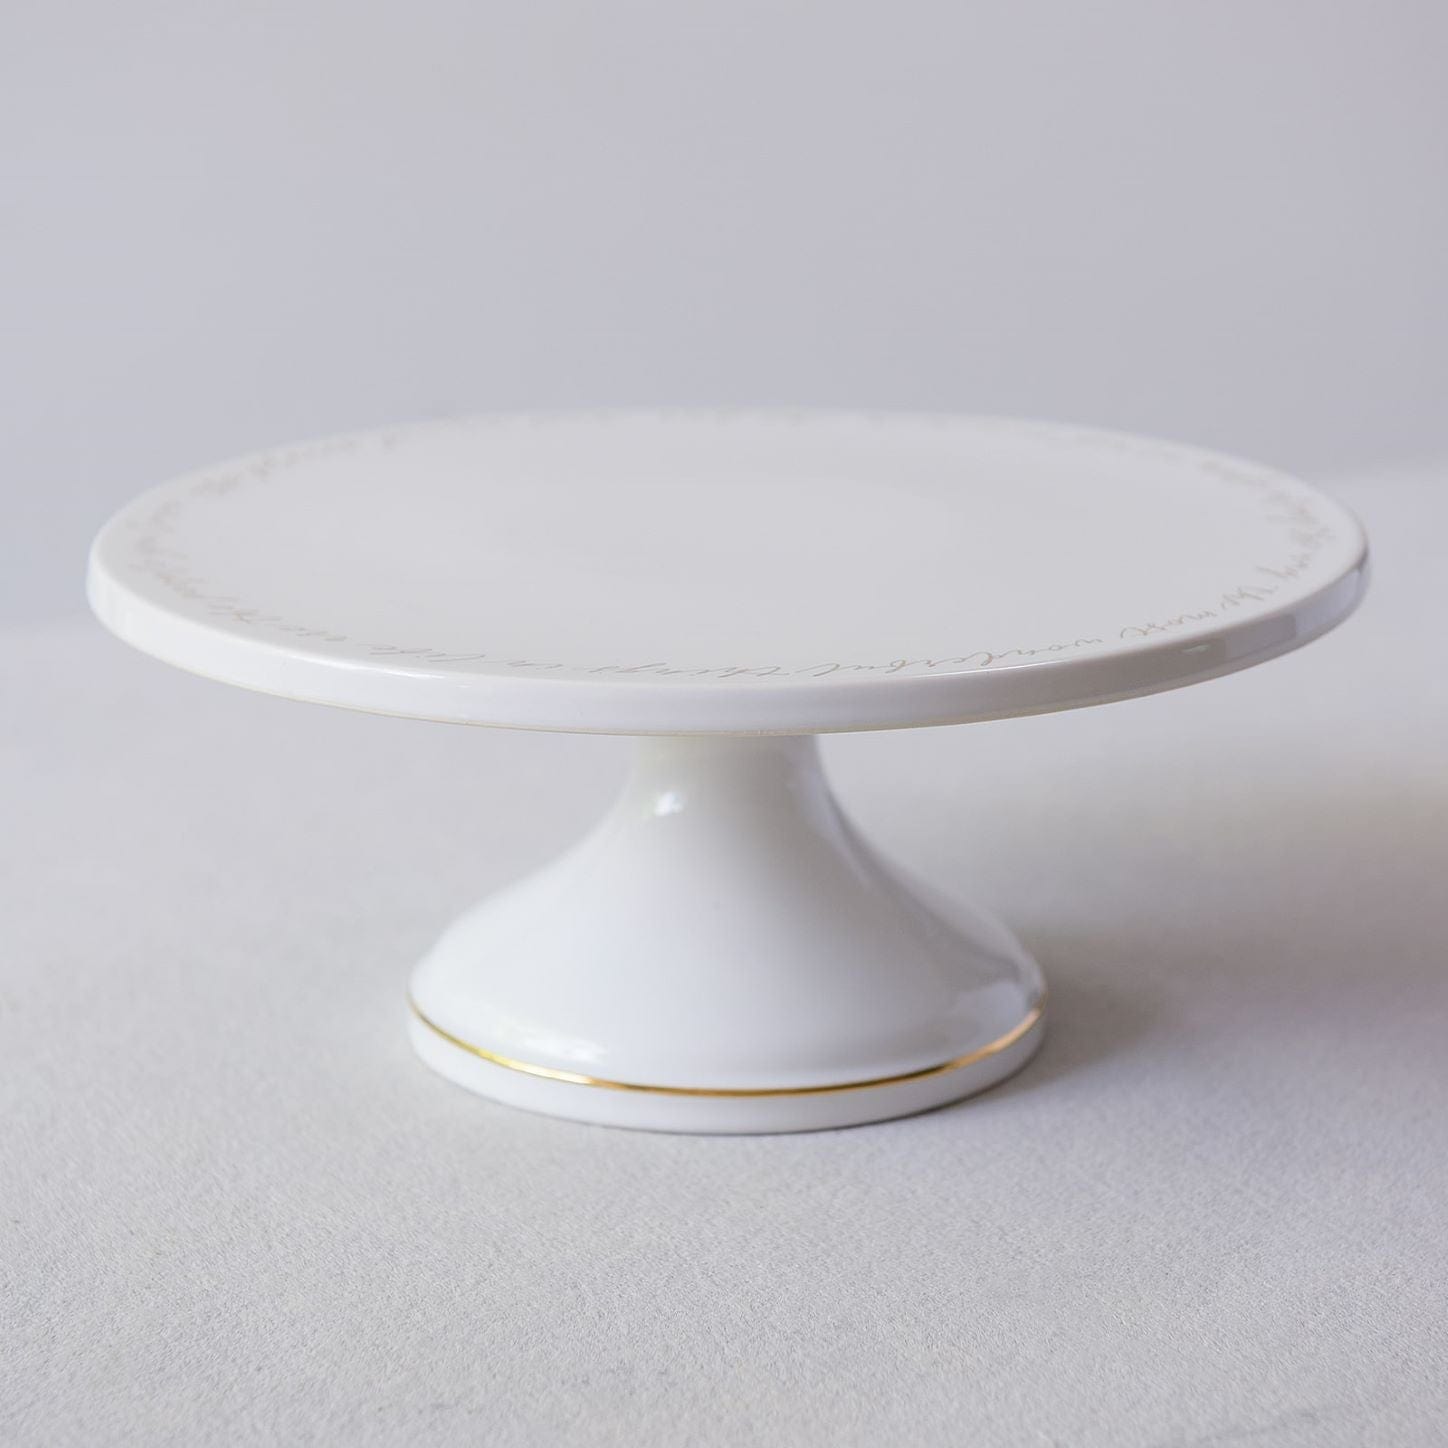 Cake Stand Style Me Pretty Cake Stand 34999